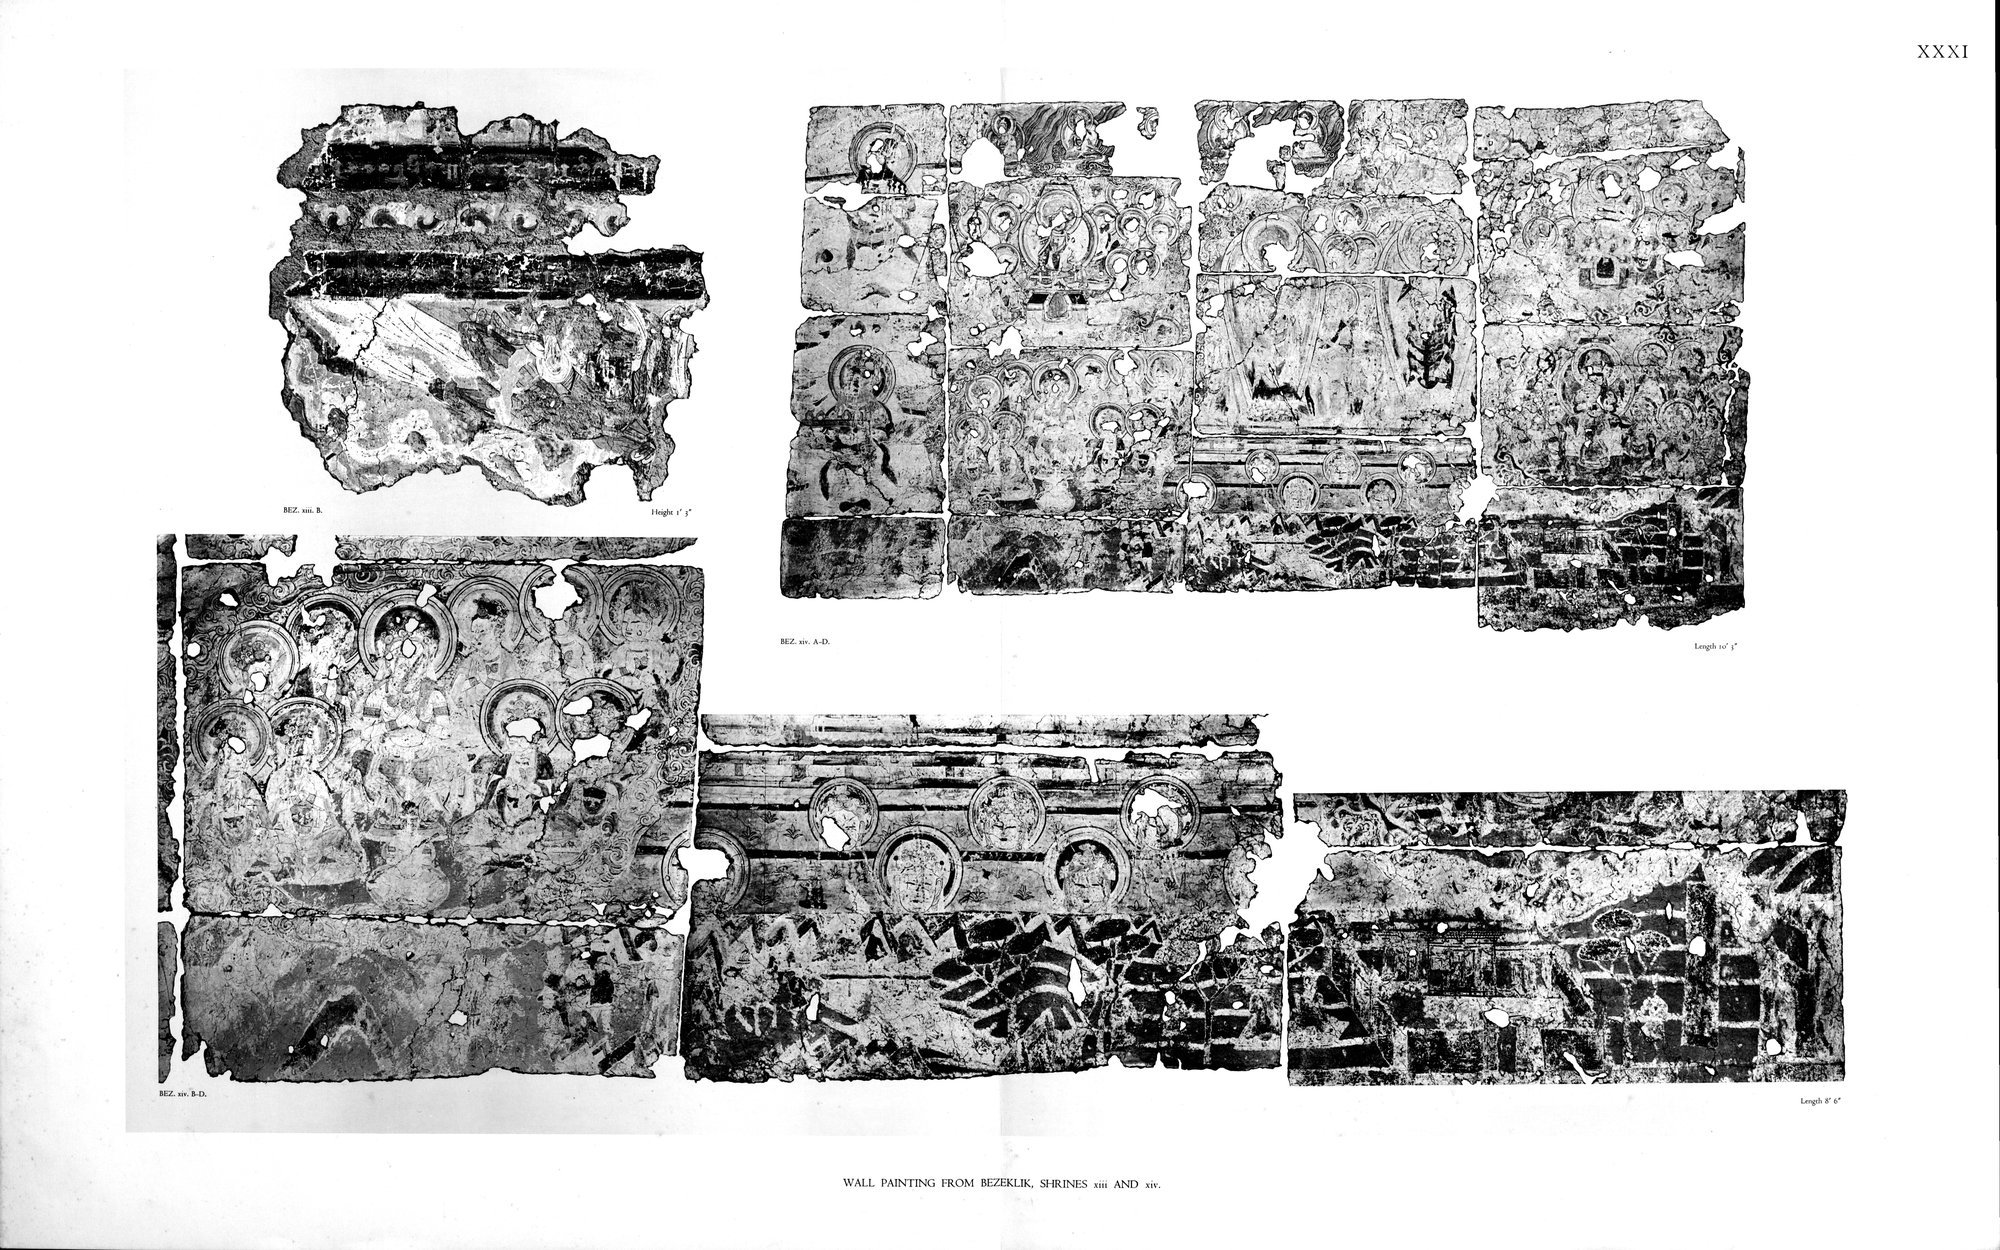 Wall Paintings from Ancient Shrines in Central Asia : vol.2 / 34 ページ（白黒高解像度画像）